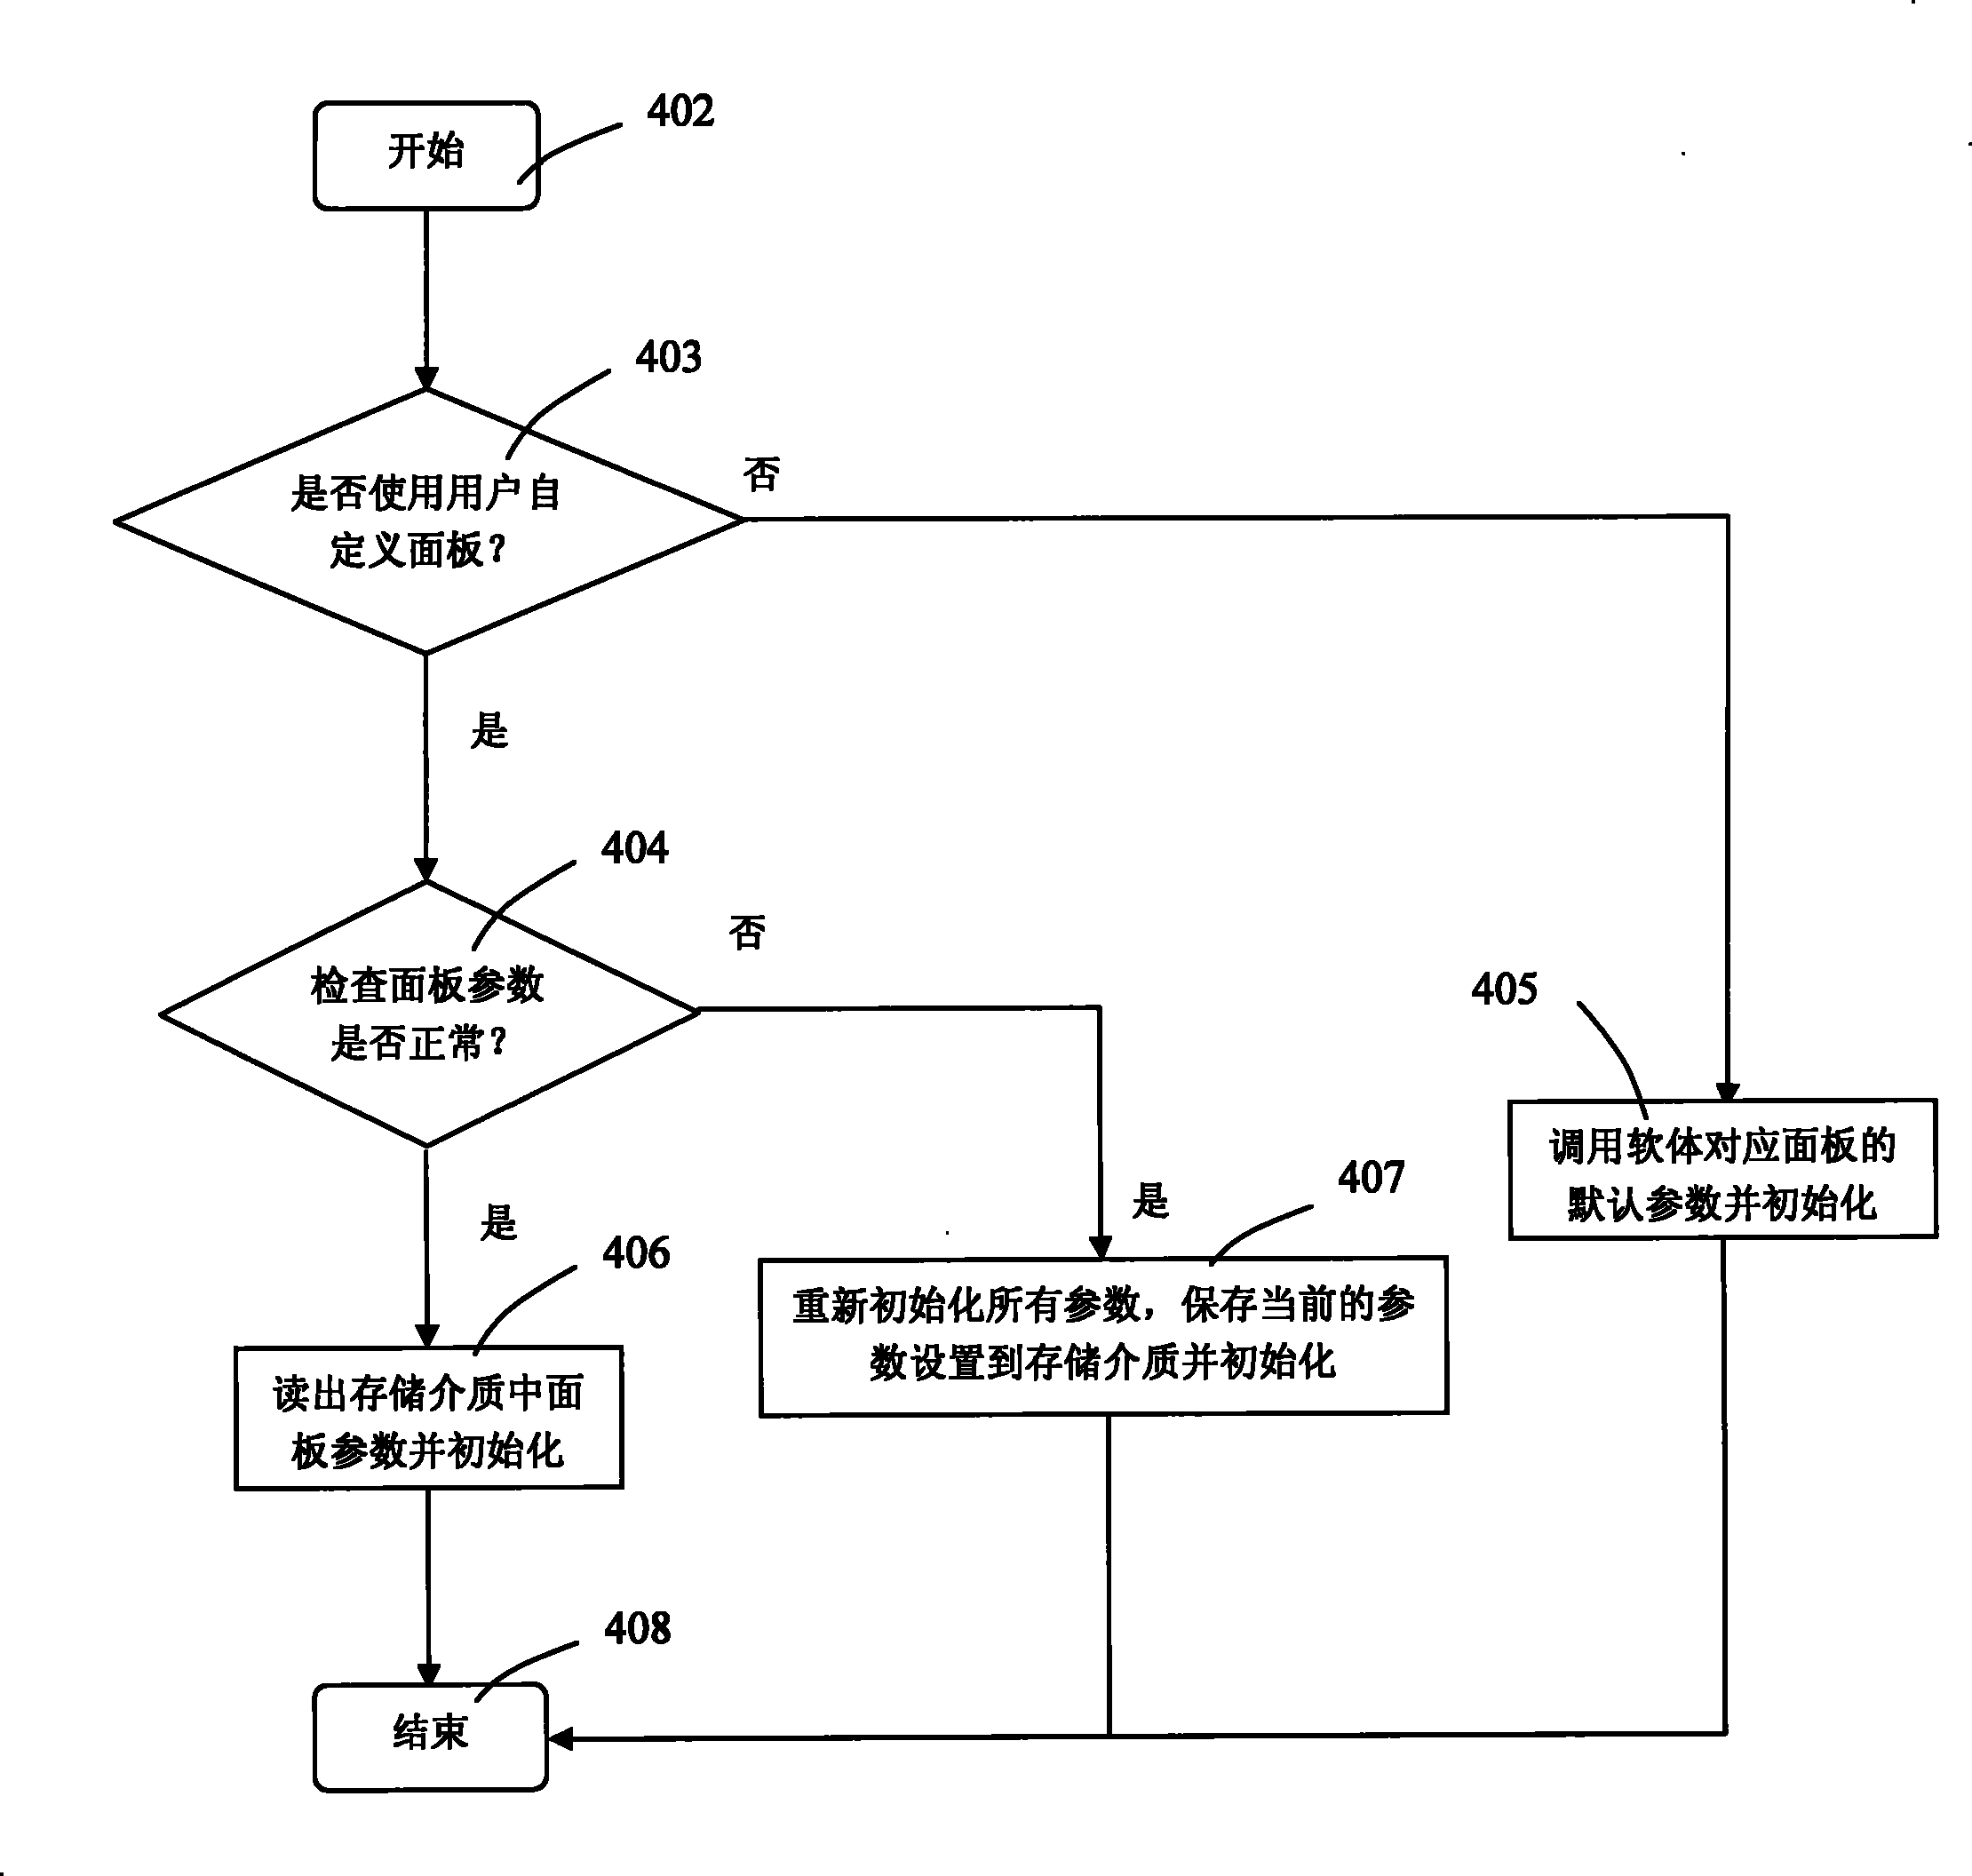 Method for reducing LCD device development cycle